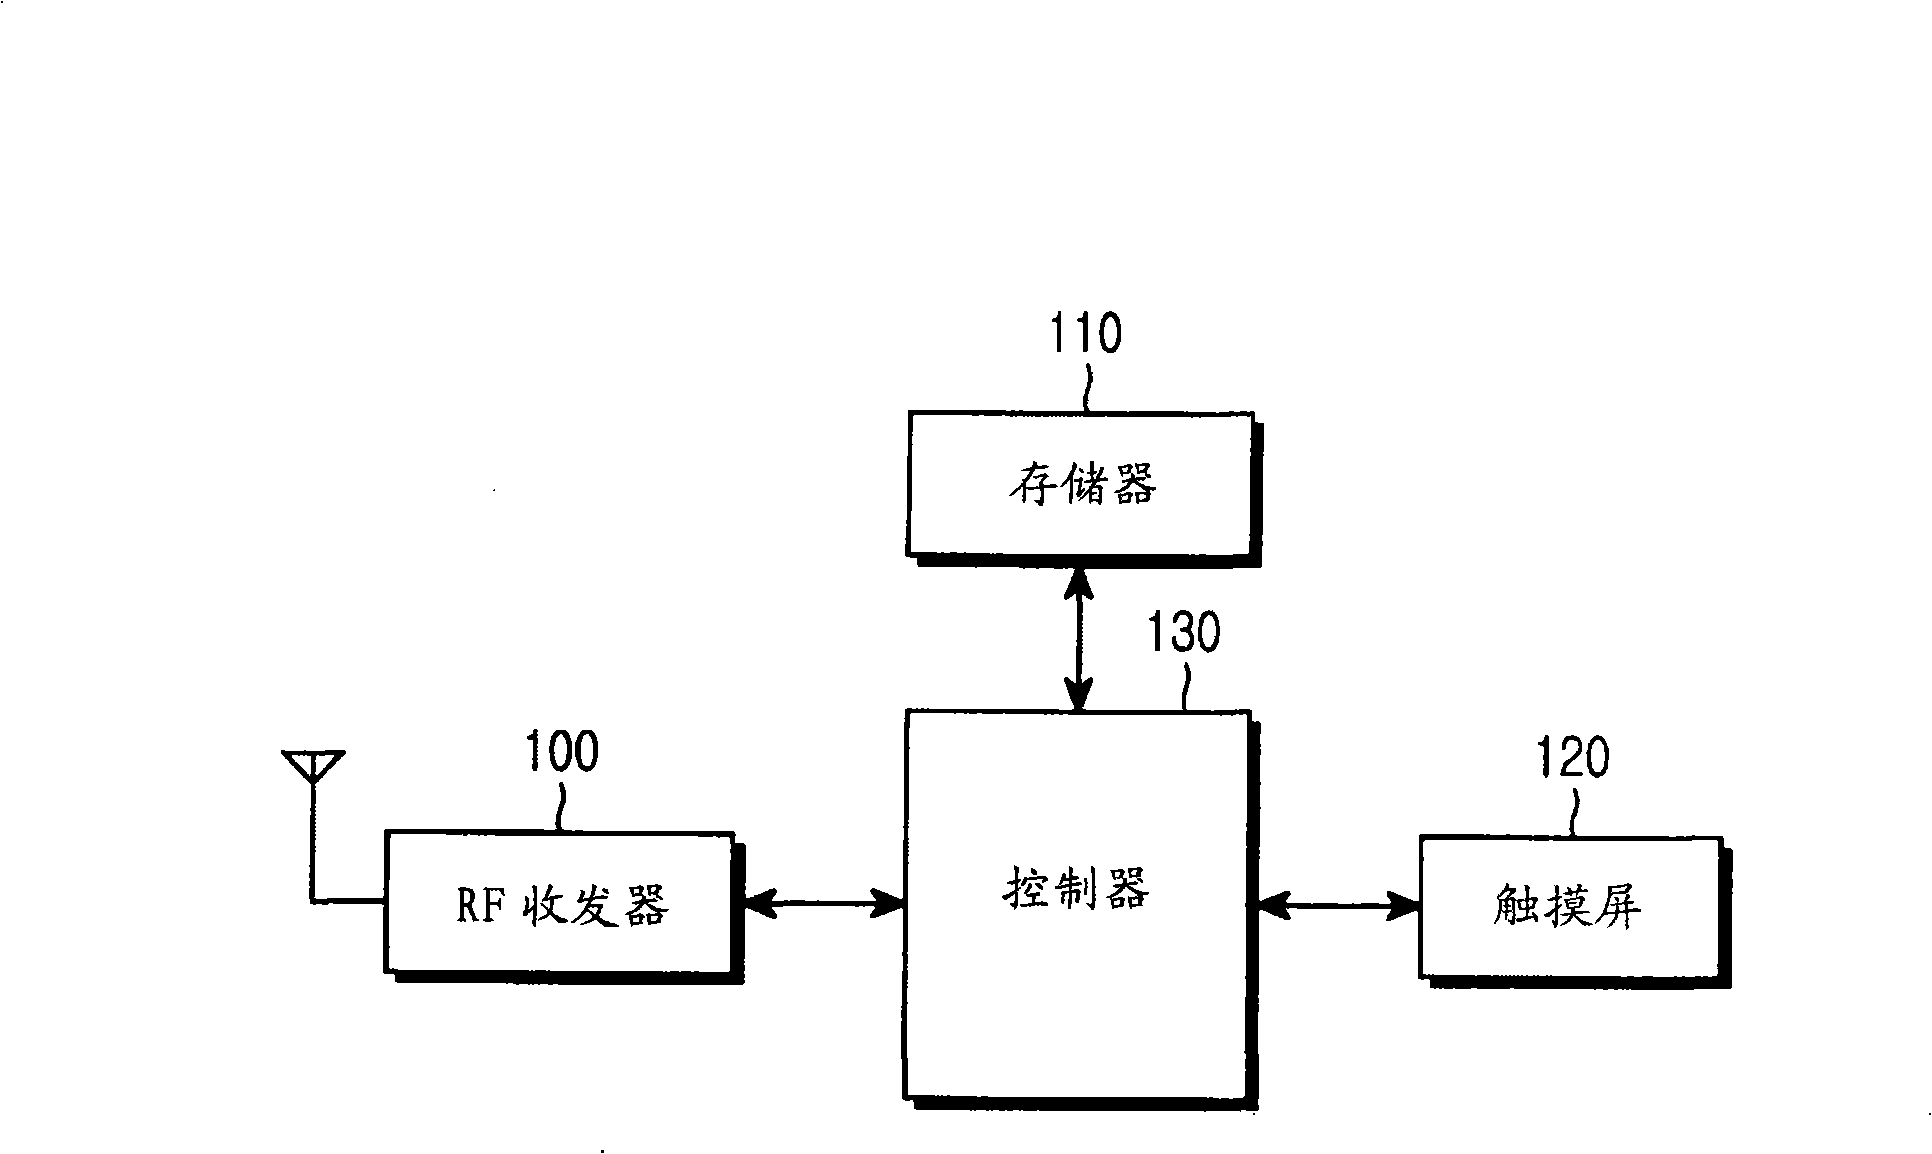 Character input apparatus and method